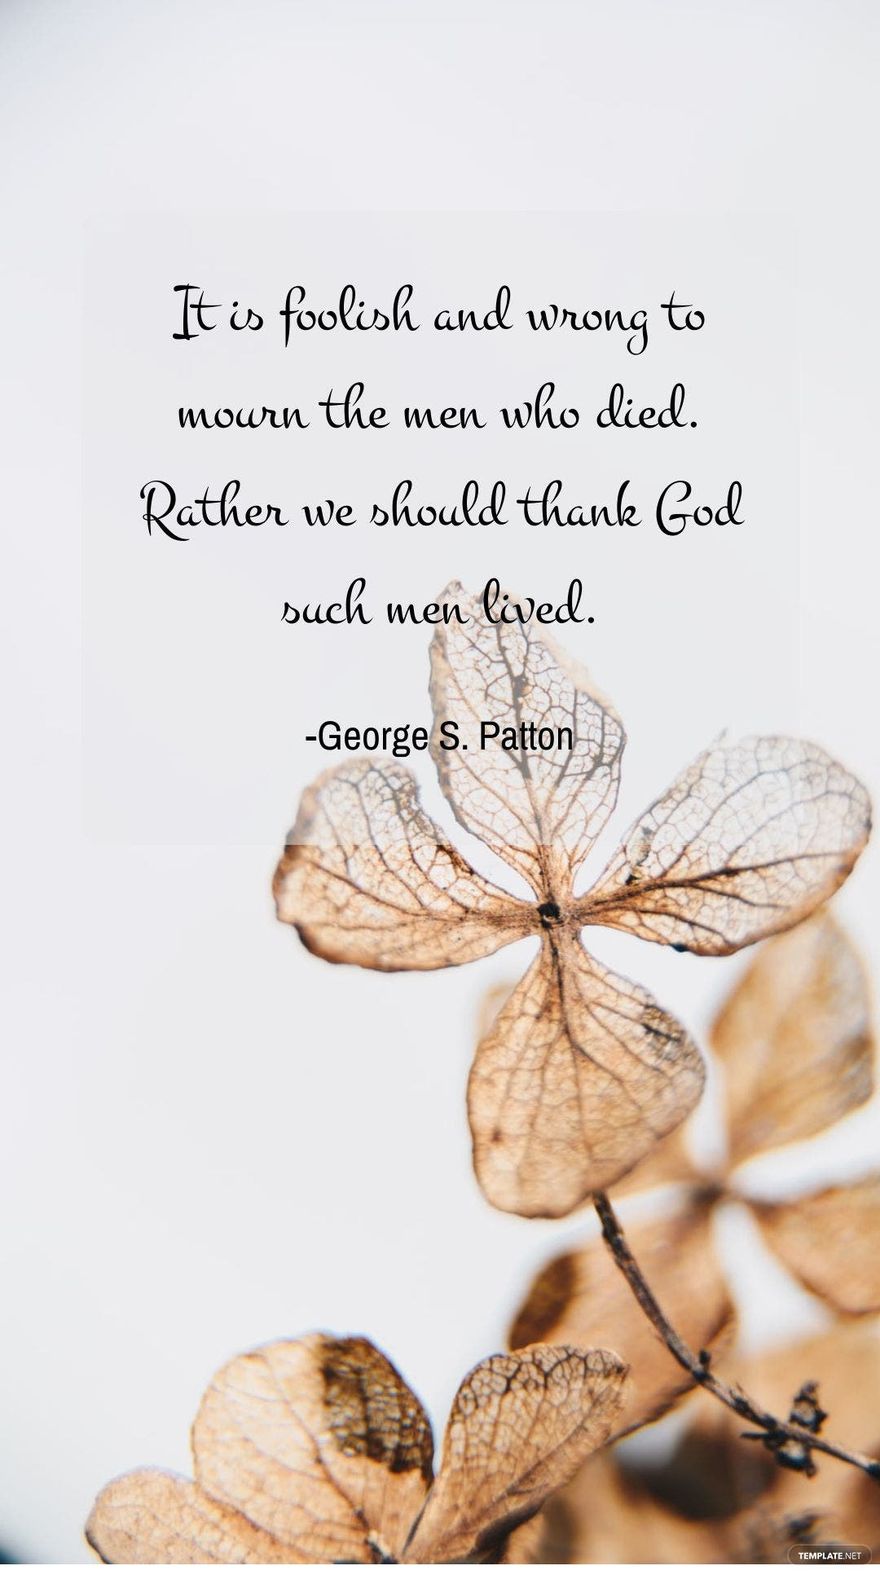 George S. Patton - It is foolish and wrong to mourn the men who died. Rather we should thank God such men lived.